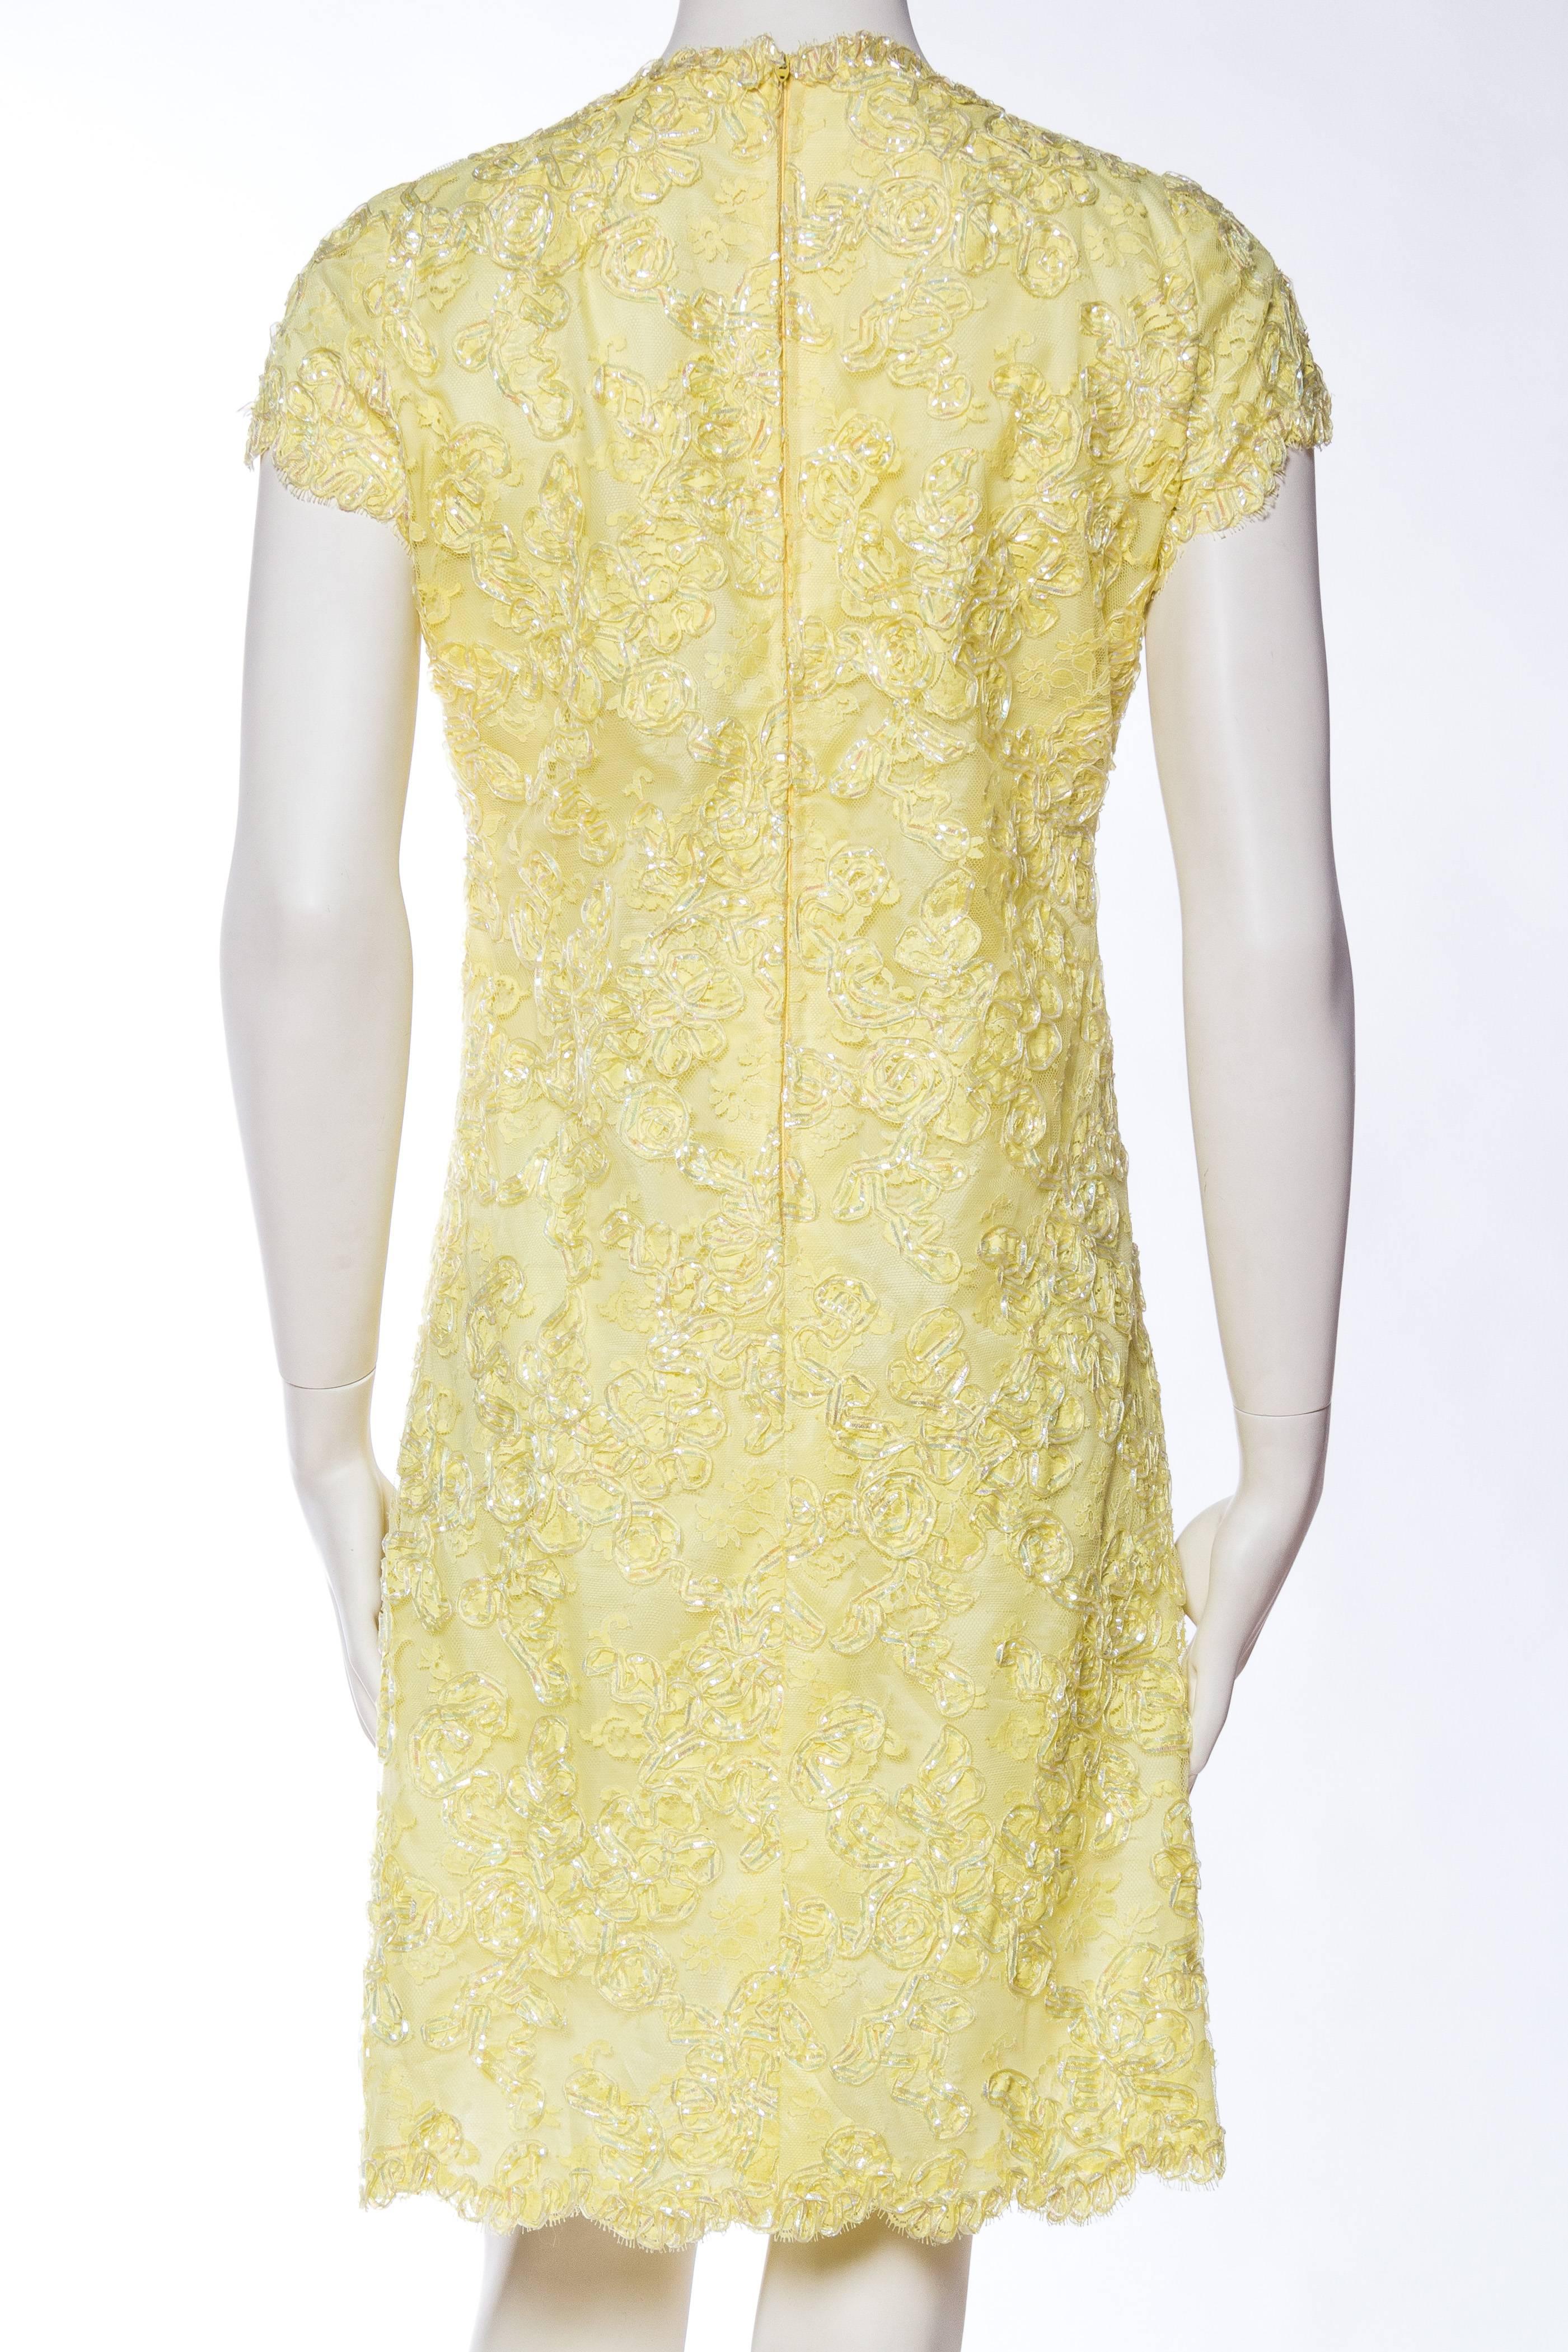 Fun 1960s Lurex Embroidered Lace Dress 1